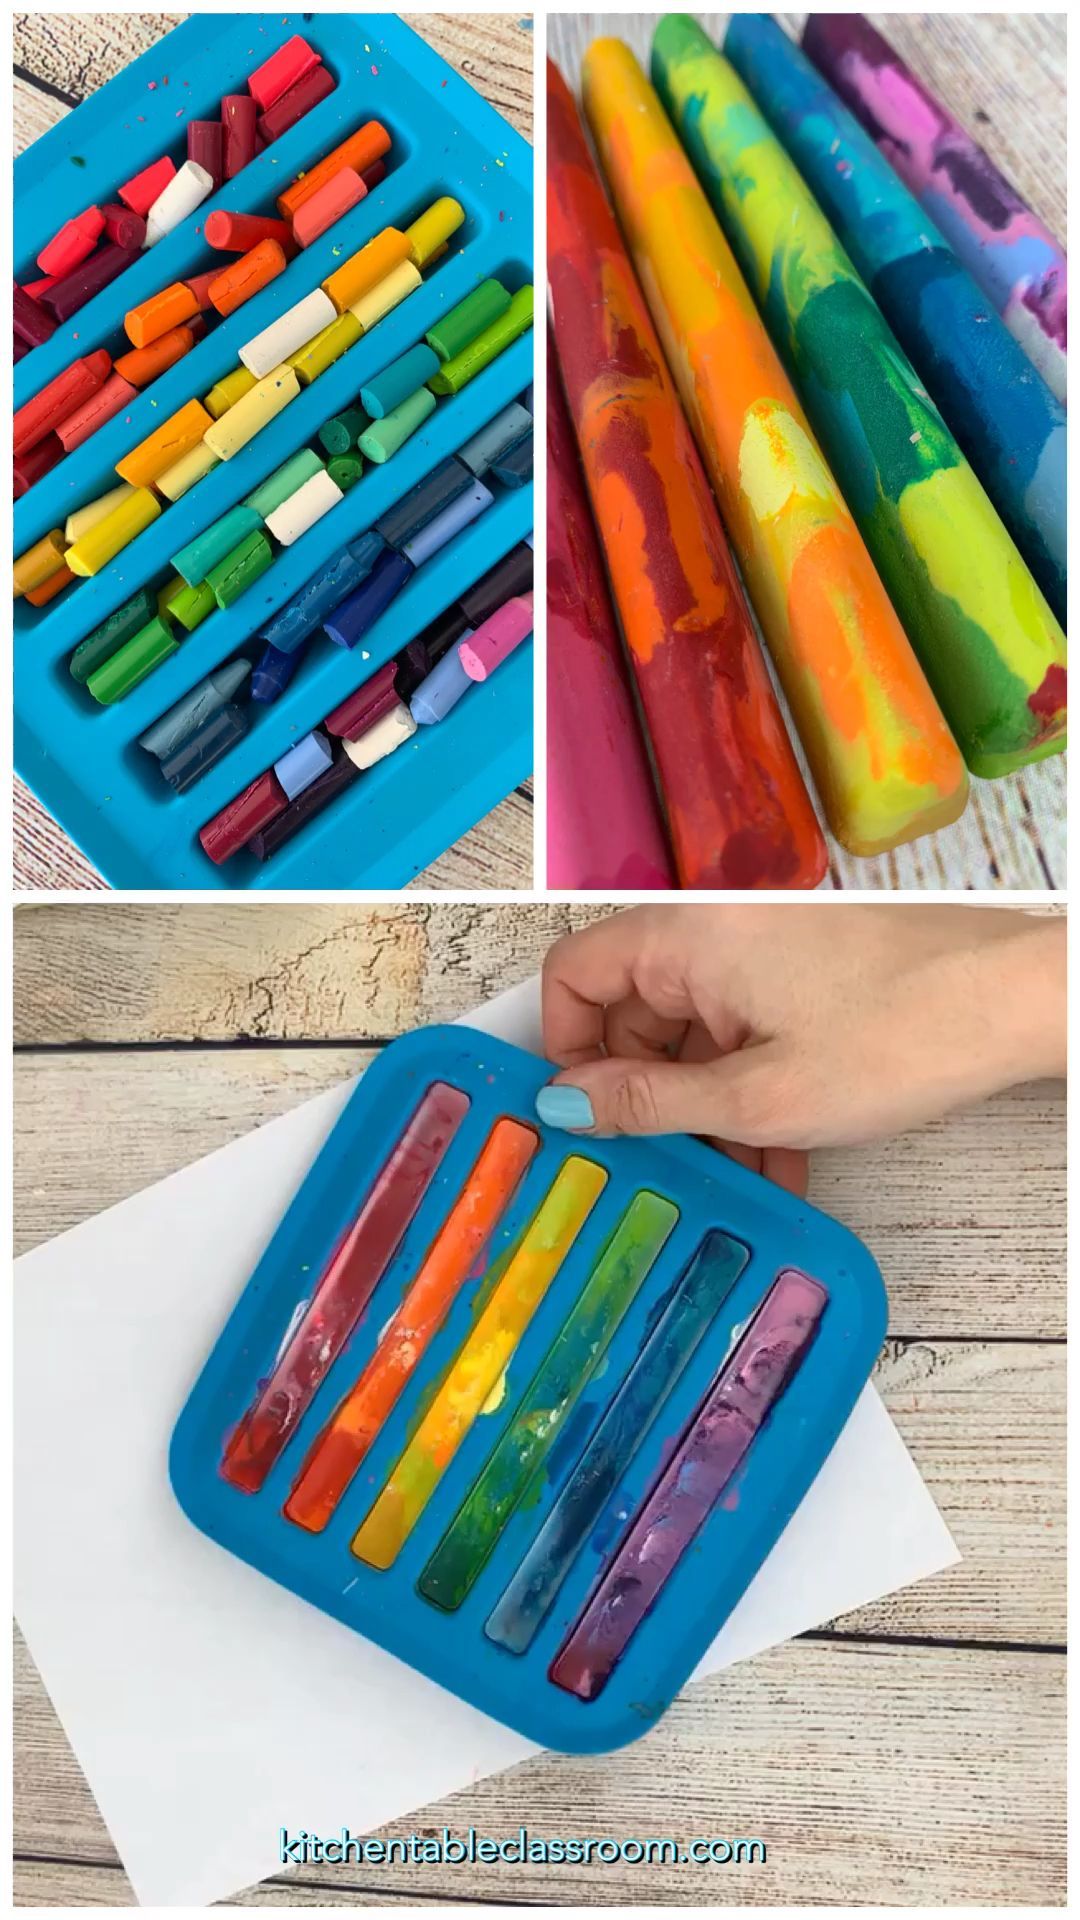 Recycling Crayons- How to Make Crayons - The Kitchen Table Classroom - Recycling Crayons- How to Make Crayons - The Kitchen Table Classroom -   19 diy Kids stuff ideas